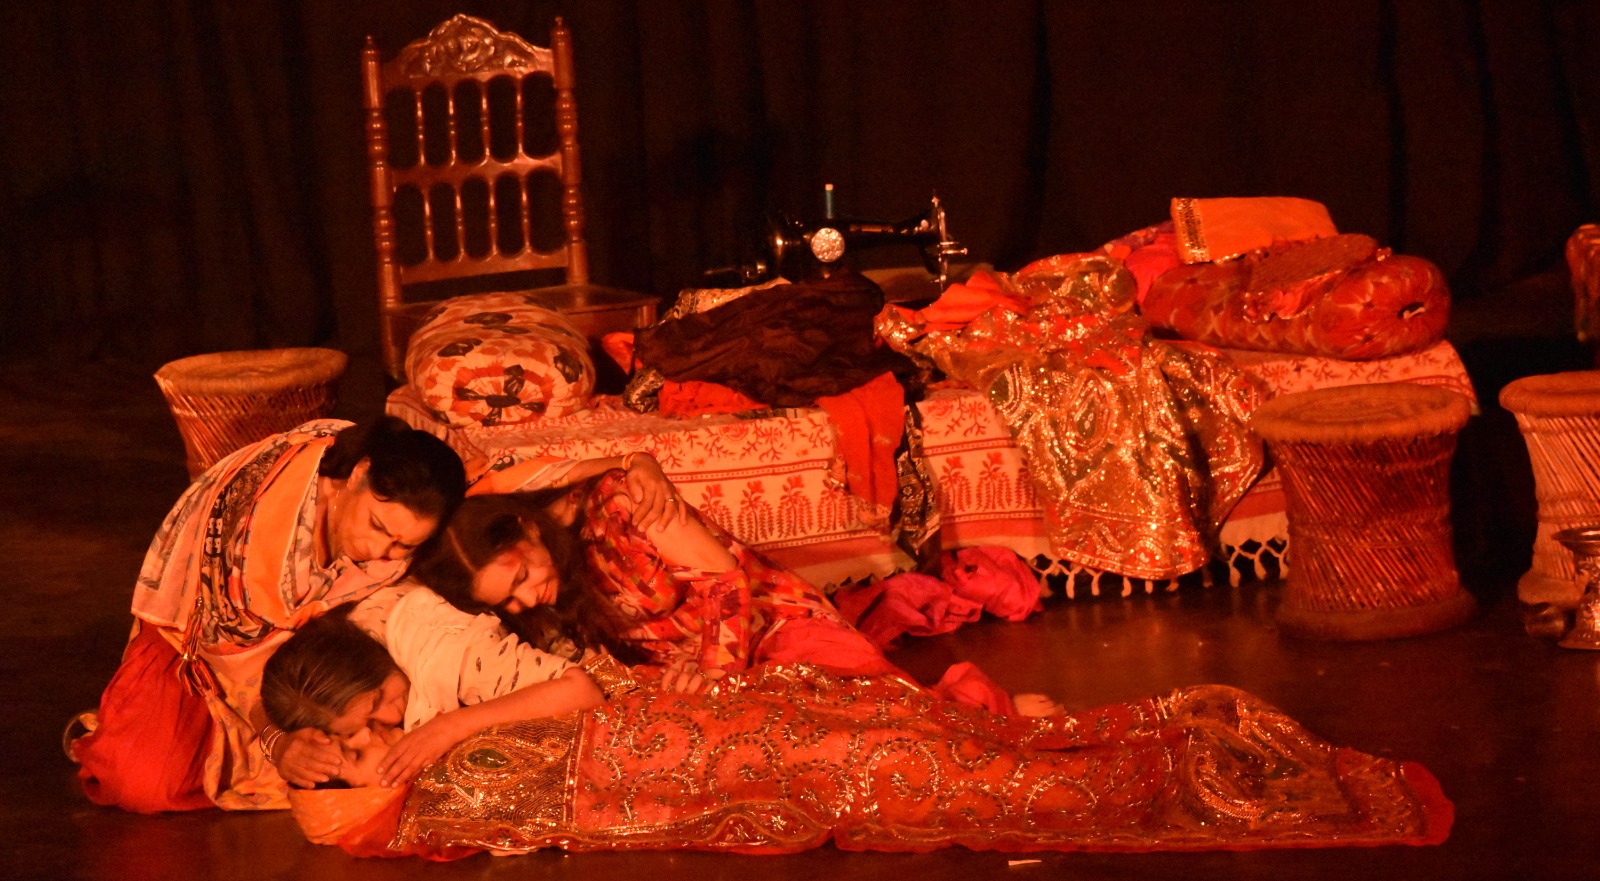 https://www.hindi.awazthevoice.in/upload/news/170350735121_An_attempt_to_make_the_society_aware_through_the_theatrical_adaptation_of_Ismat_Chughtai's_‘Chauthi_Ka_Joda’_5.jpg